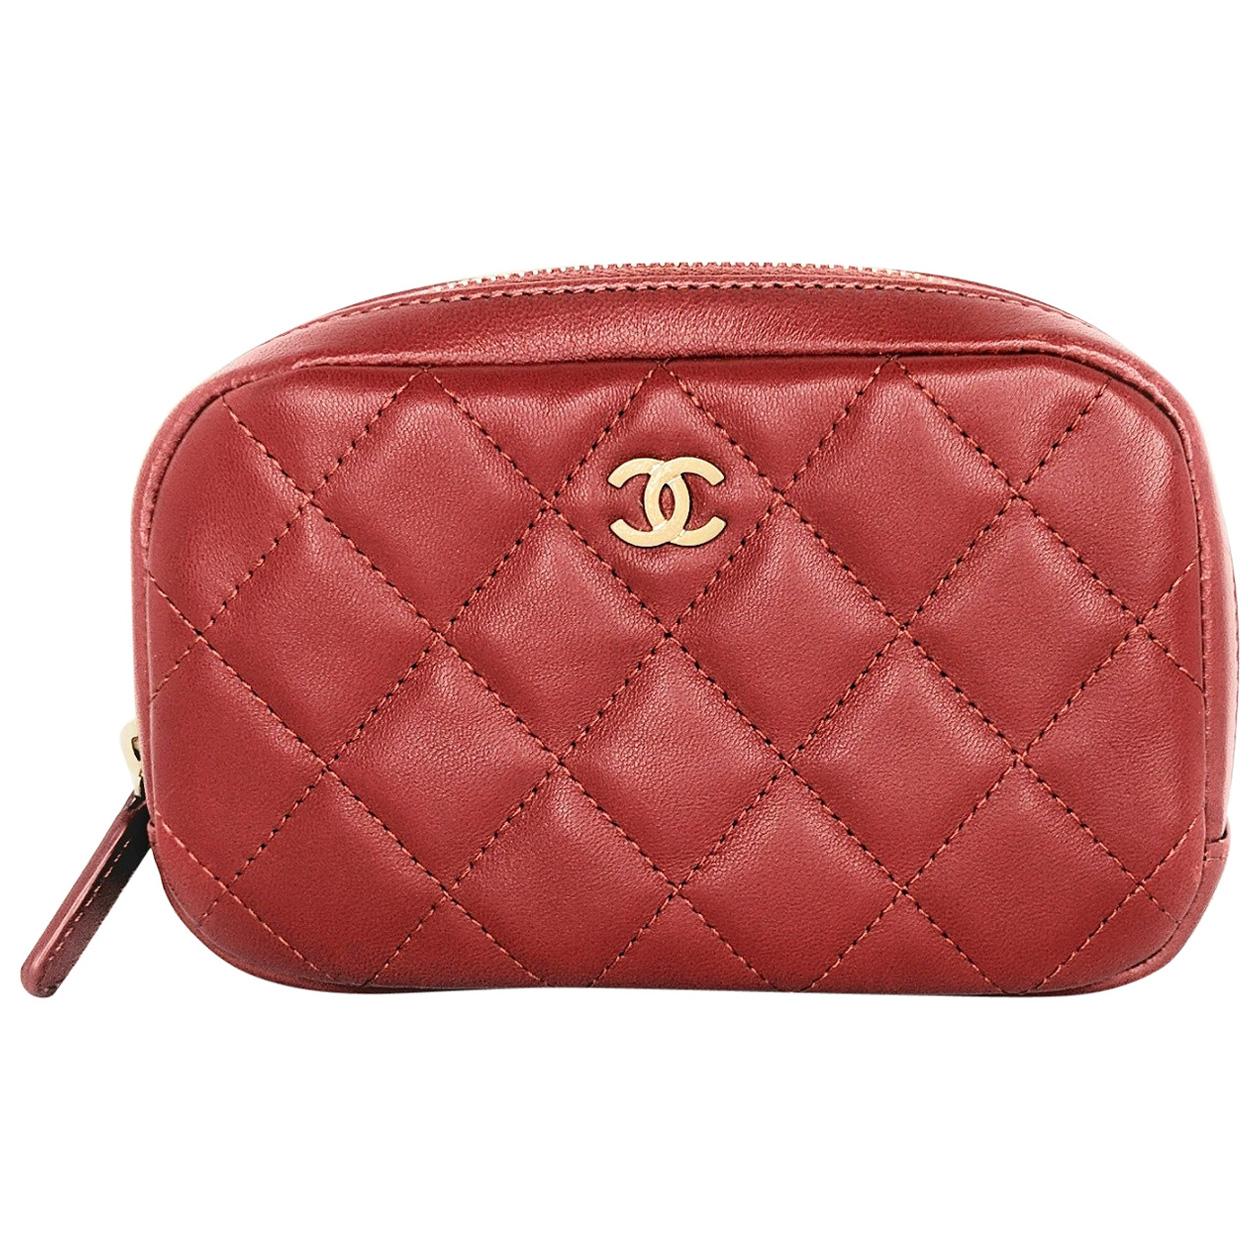 Chanel 2019 Red Quilted Lambskin Classic Case